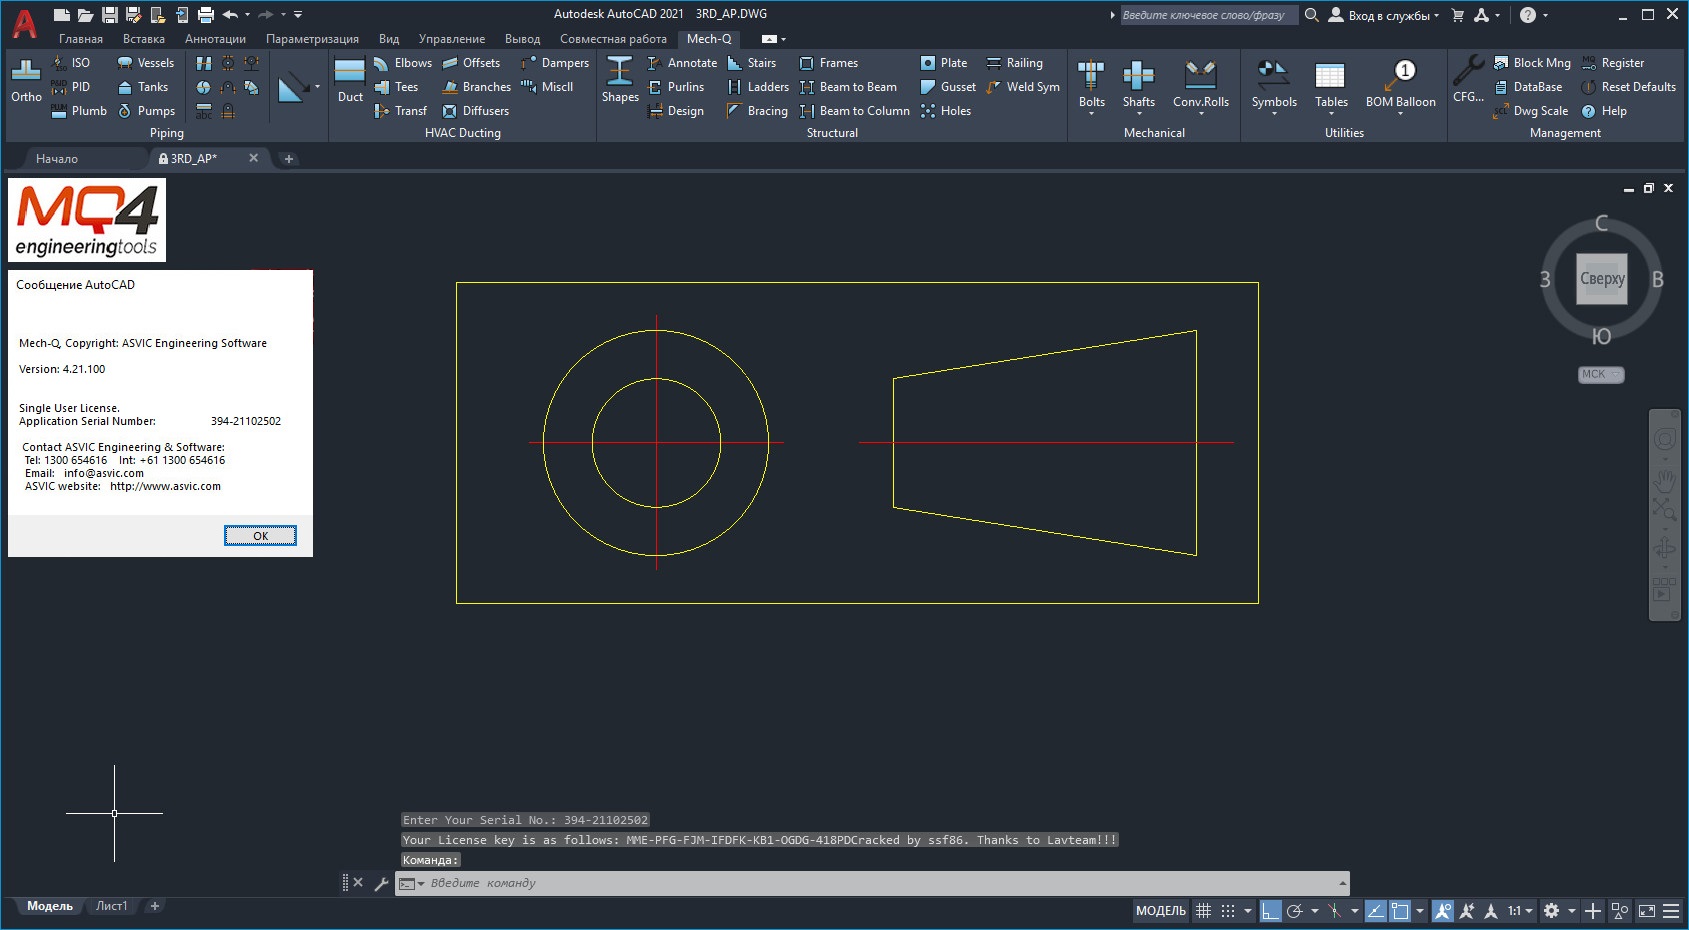 Working for ASVIC Mech-Q Full Suite 4.21.100 for AutoCAD 2000-2021